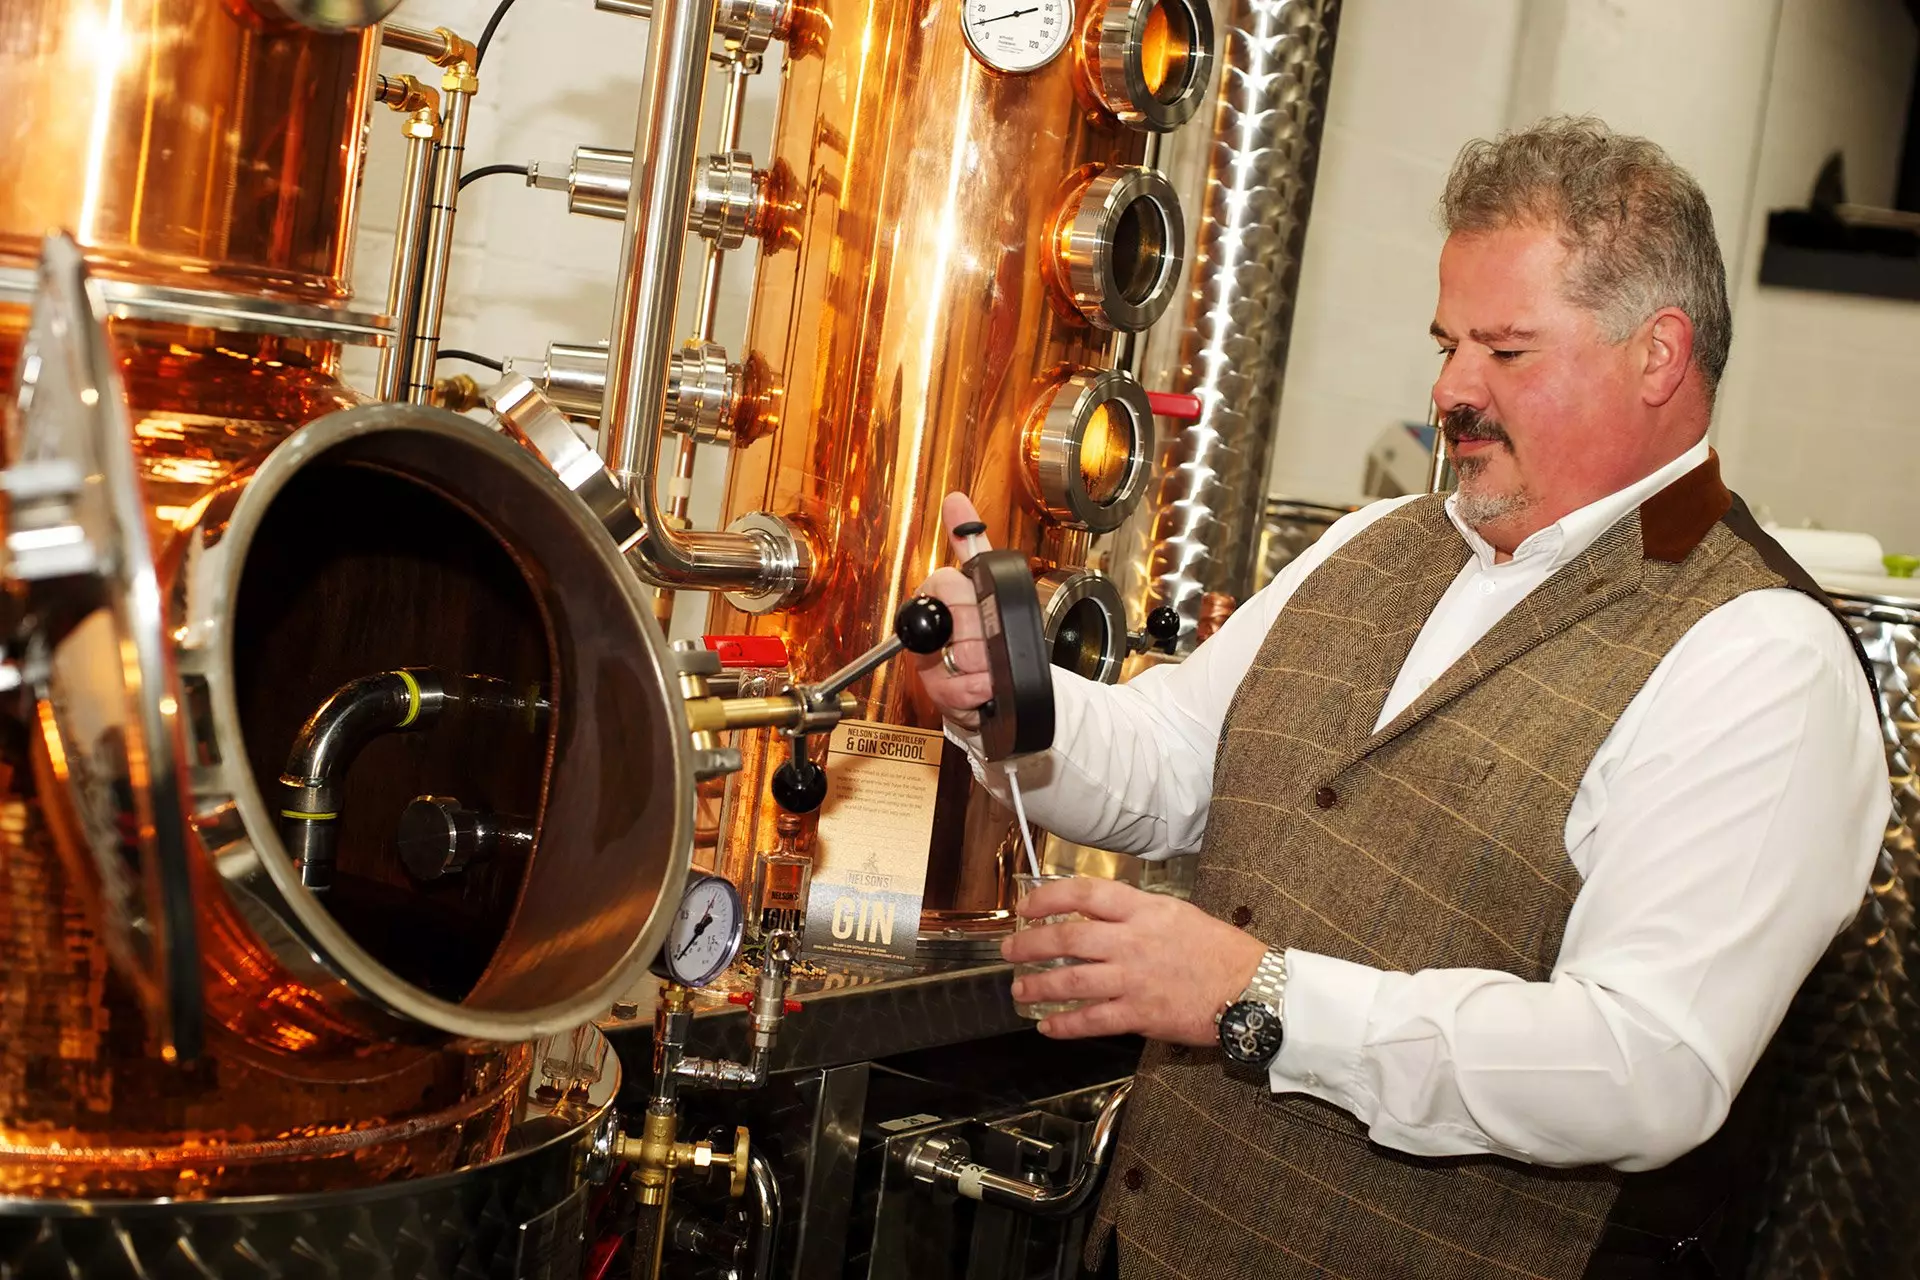 Nelson's Distillery & School is currently brewing the unique gin (